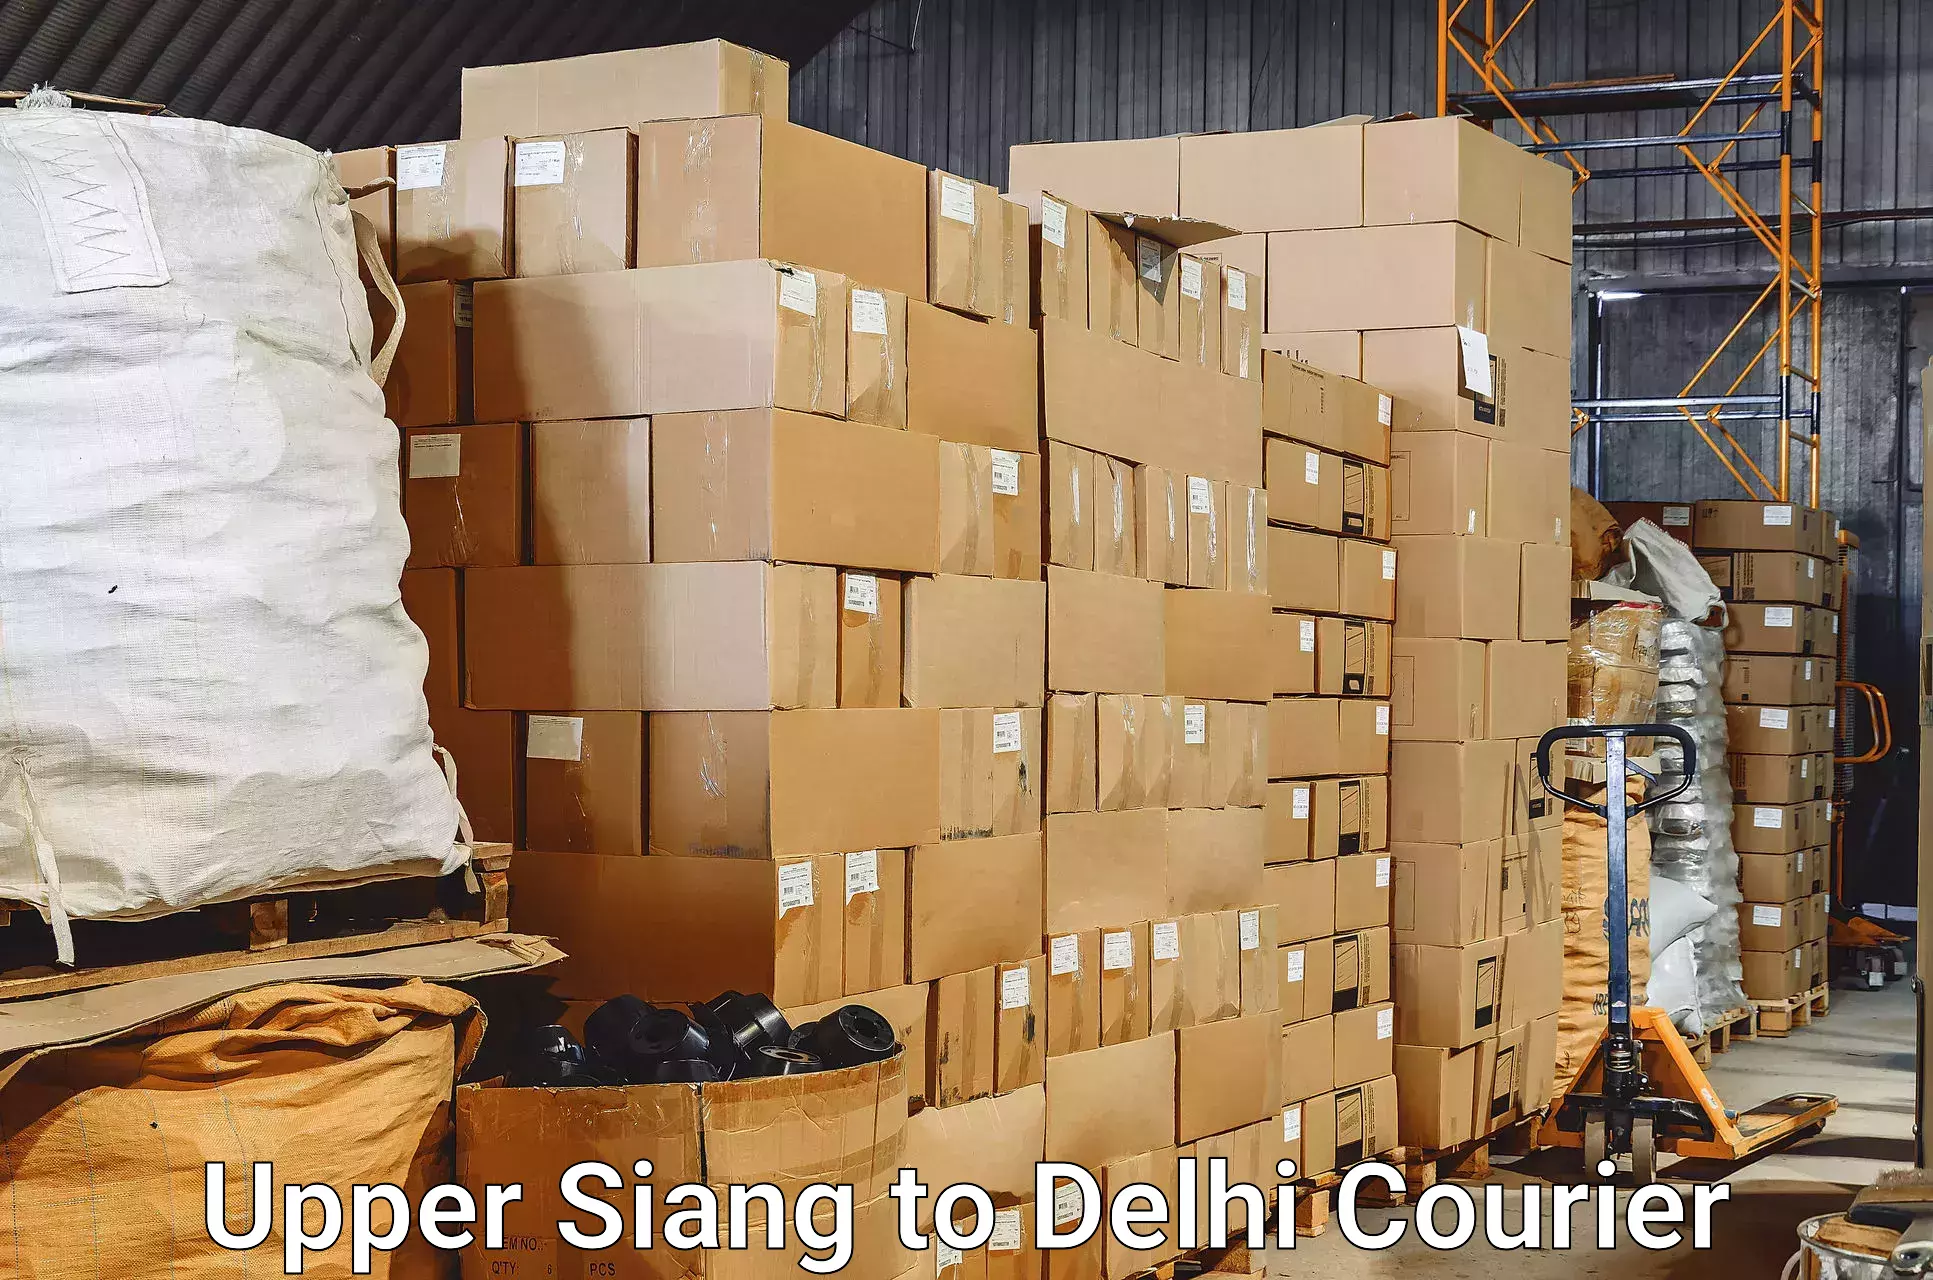 Same day luggage service Upper Siang to East Delhi